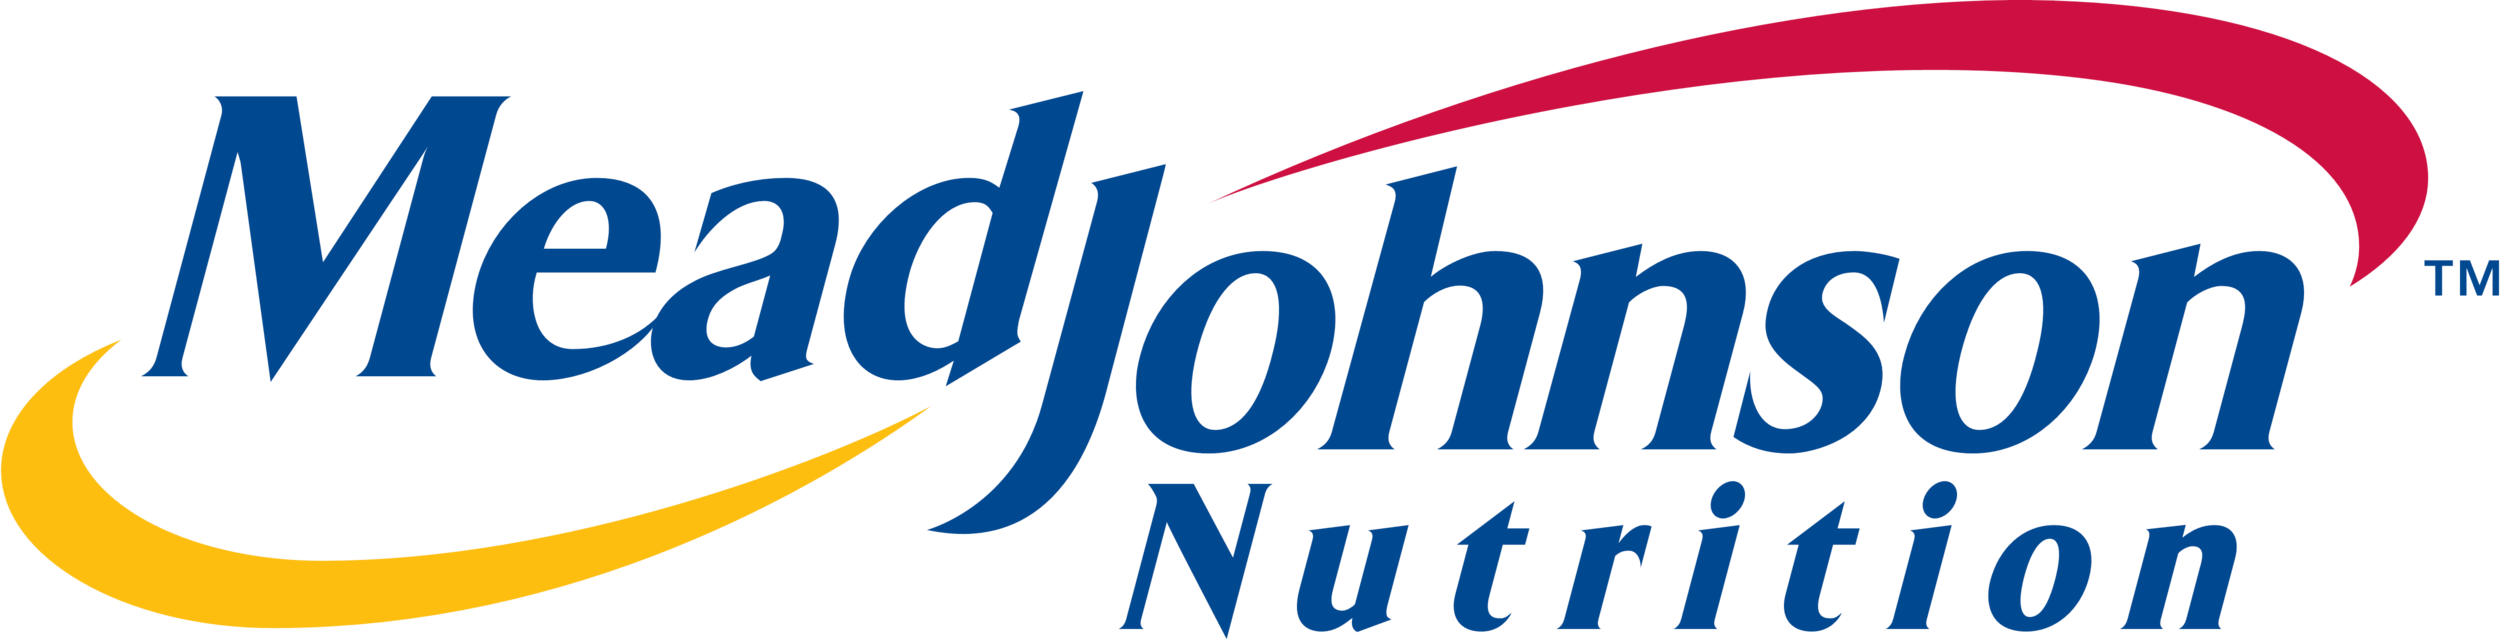 Mead_Johnson_Nutrition_logo.png